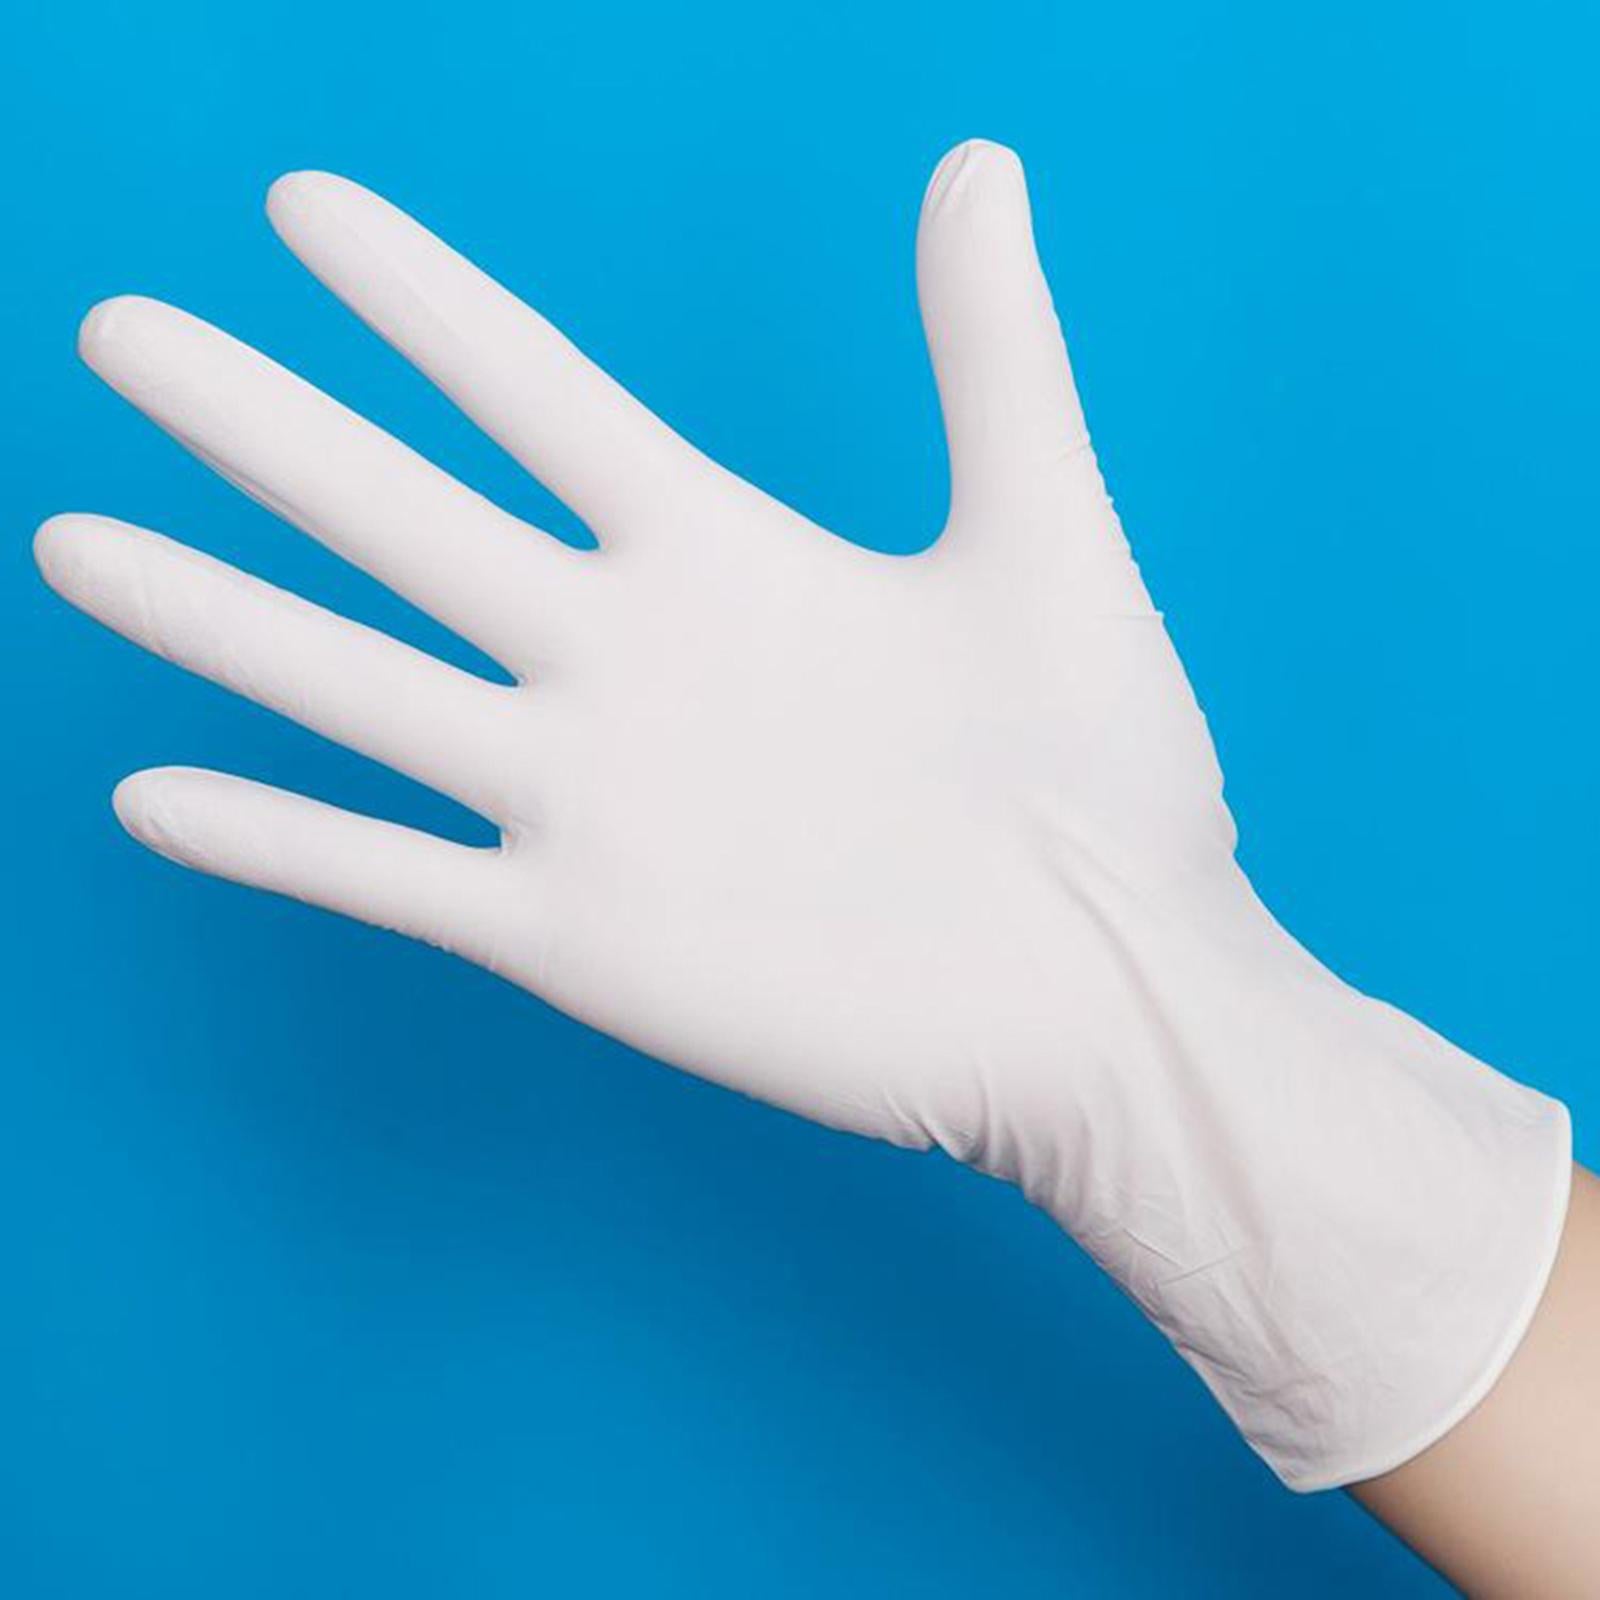 10Pcs Strong Nitrile Gloves Powder Free Pet Care Protective Gloves White L